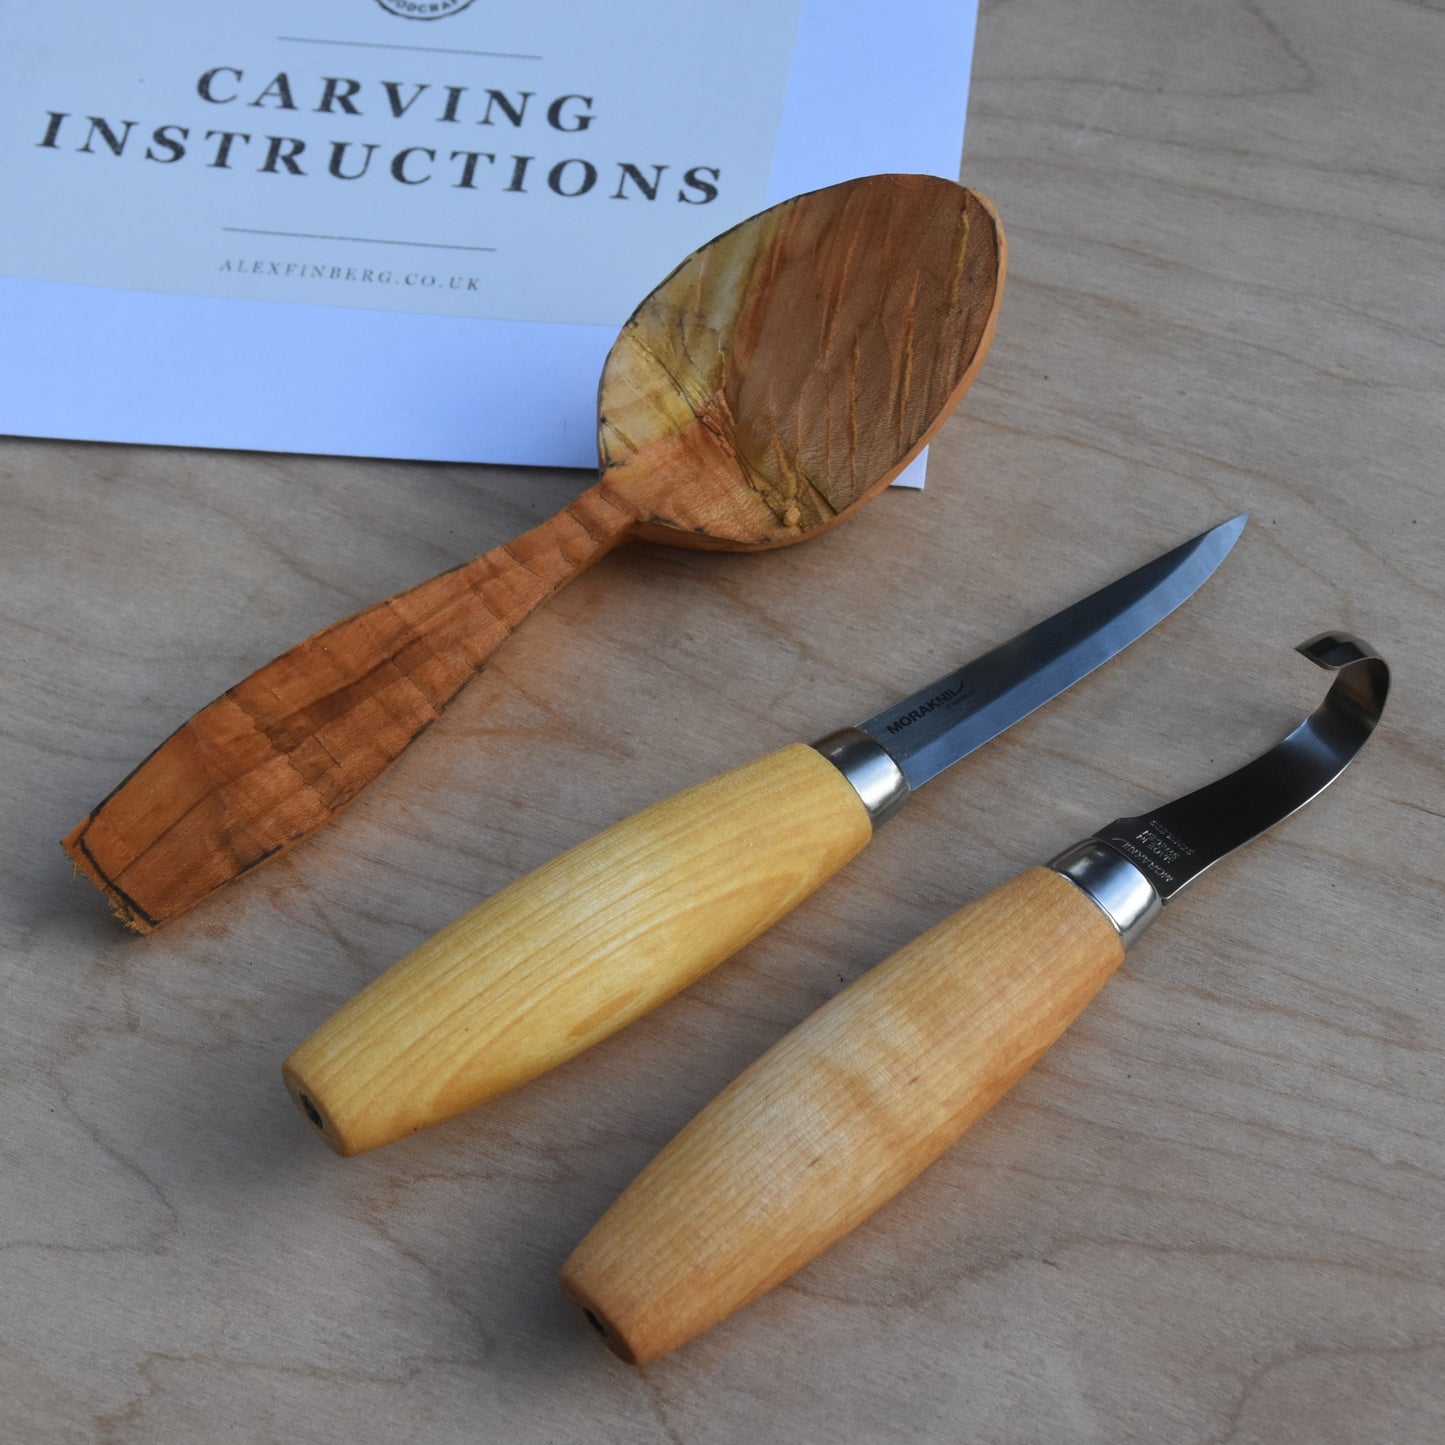 Carve Your Own Eating Spoon Kit